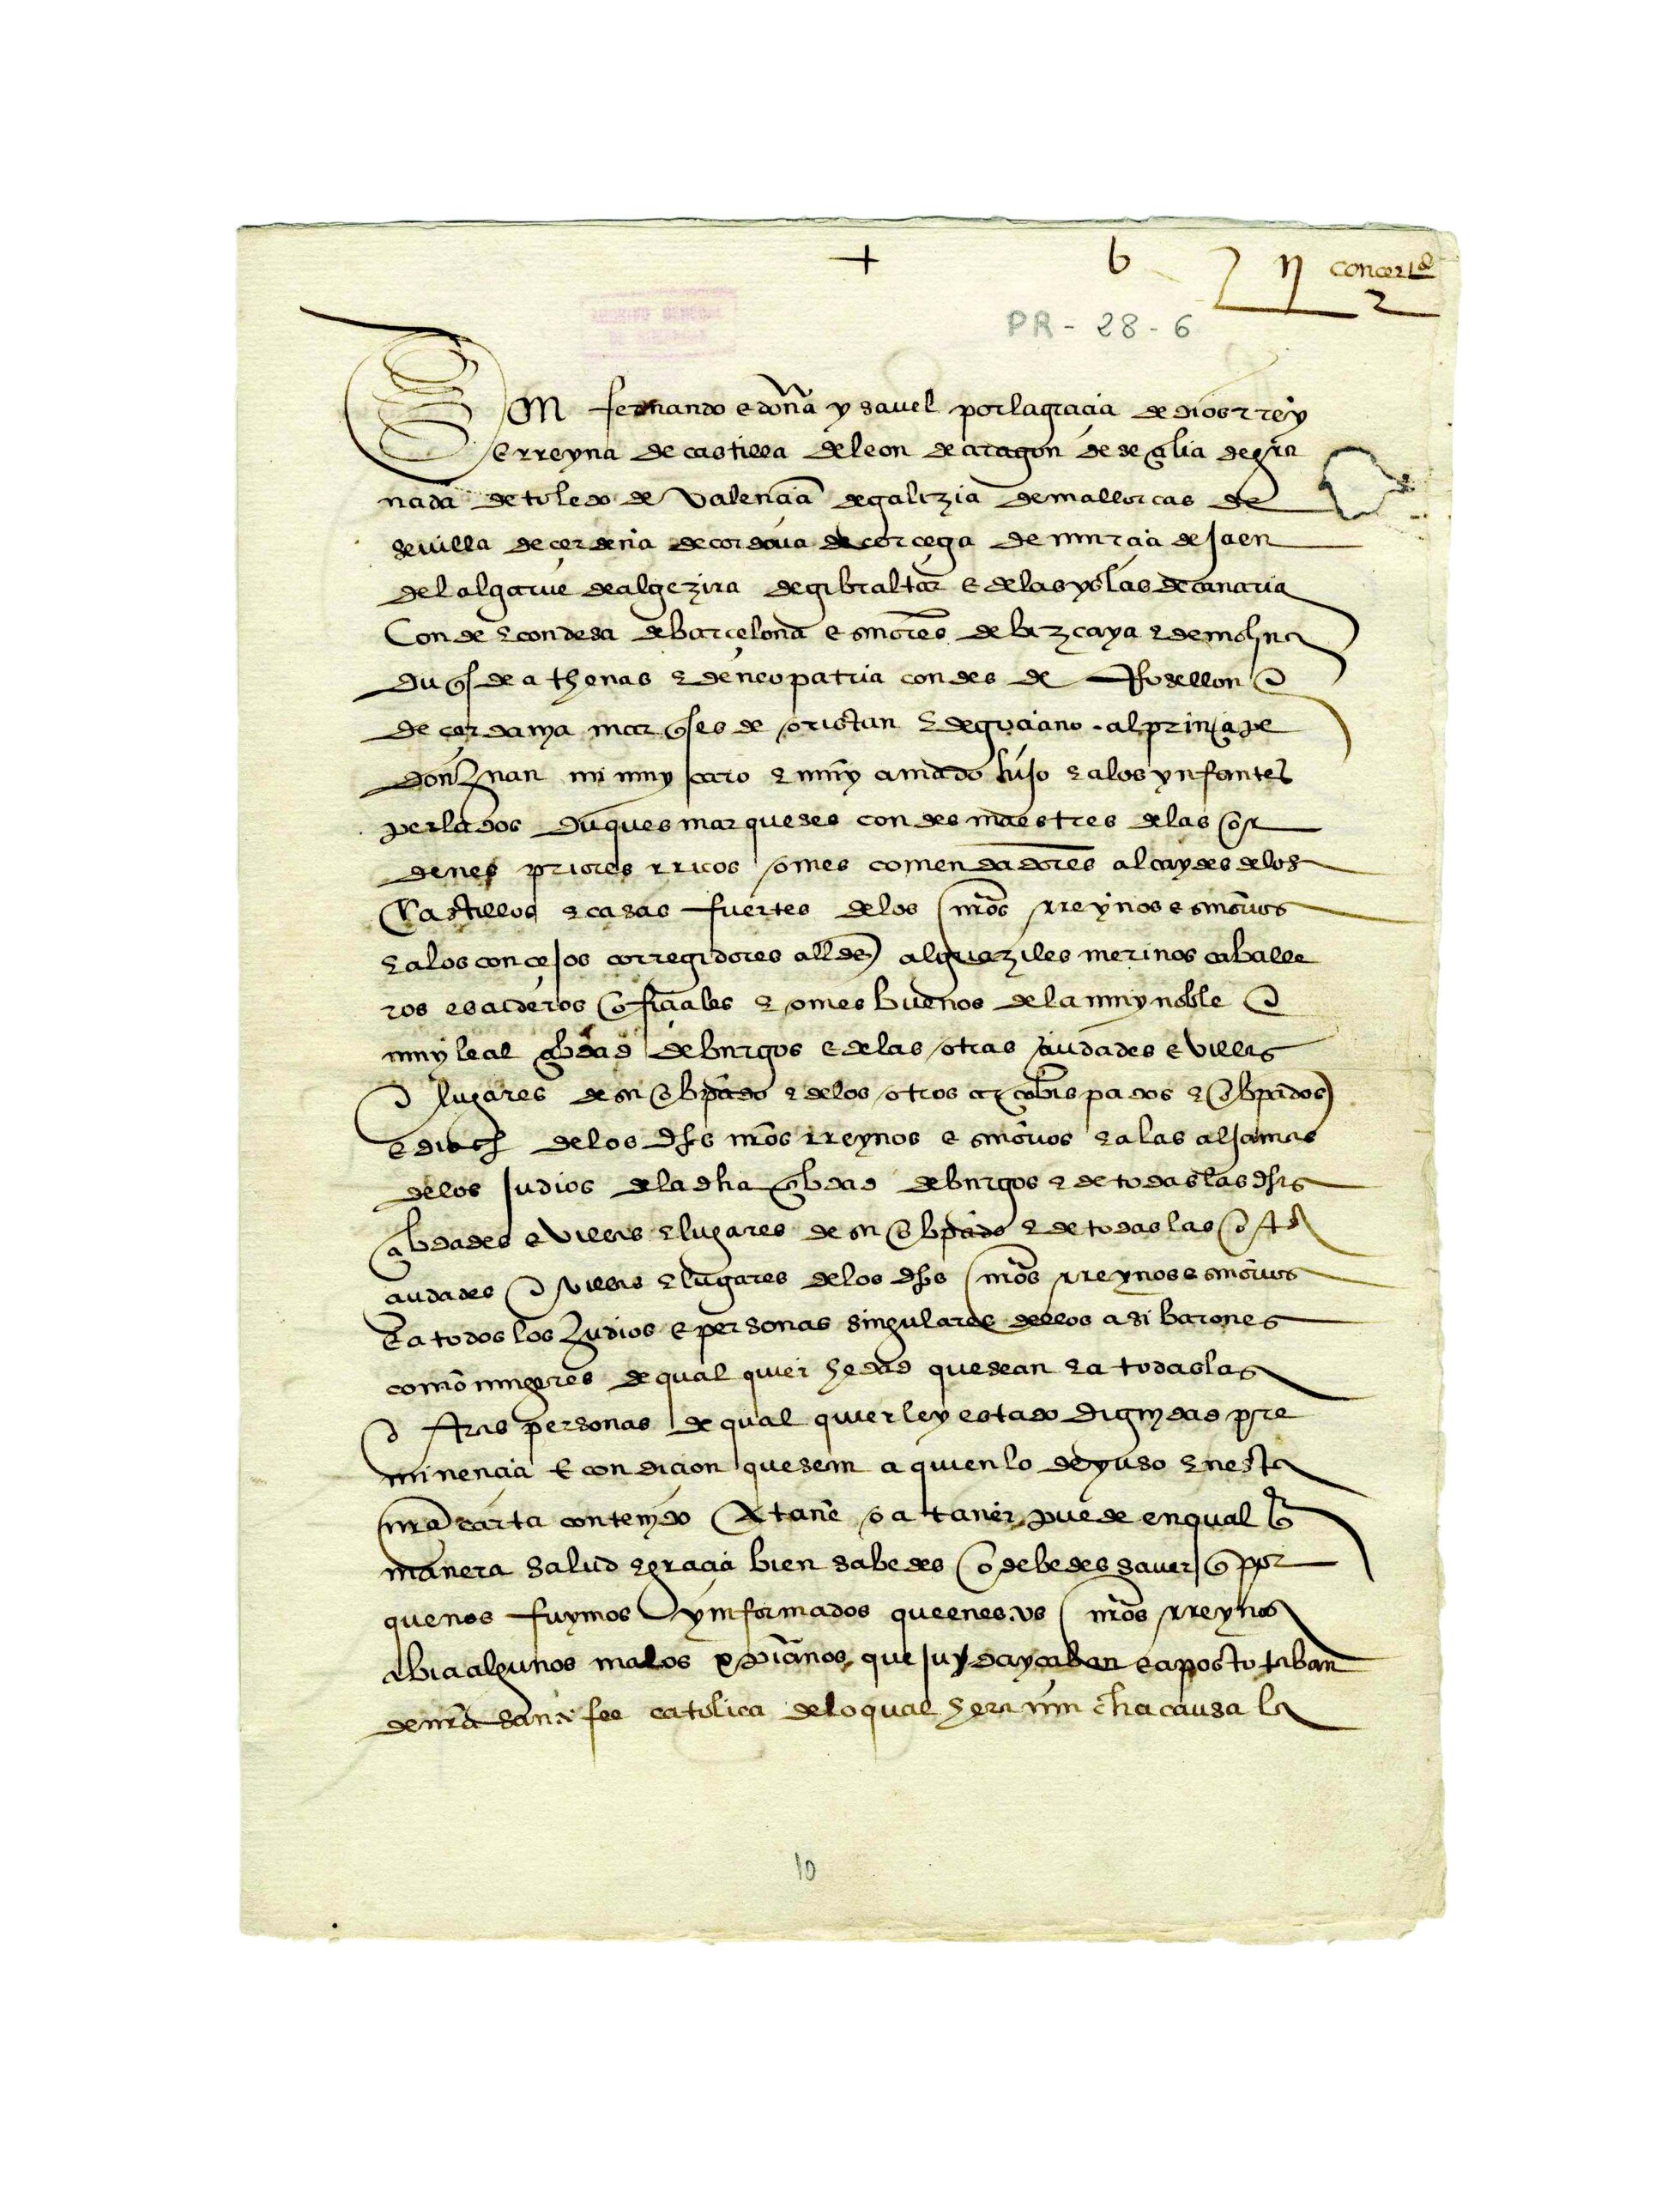 The Alhambra Decree, known as the Edict of Expulsion. Issued March 31, 1492, in Granada by King Ferdinand and Queen Isabella, it expelled Jews from Spain. Courtesy of the Archivo General de Simancas.